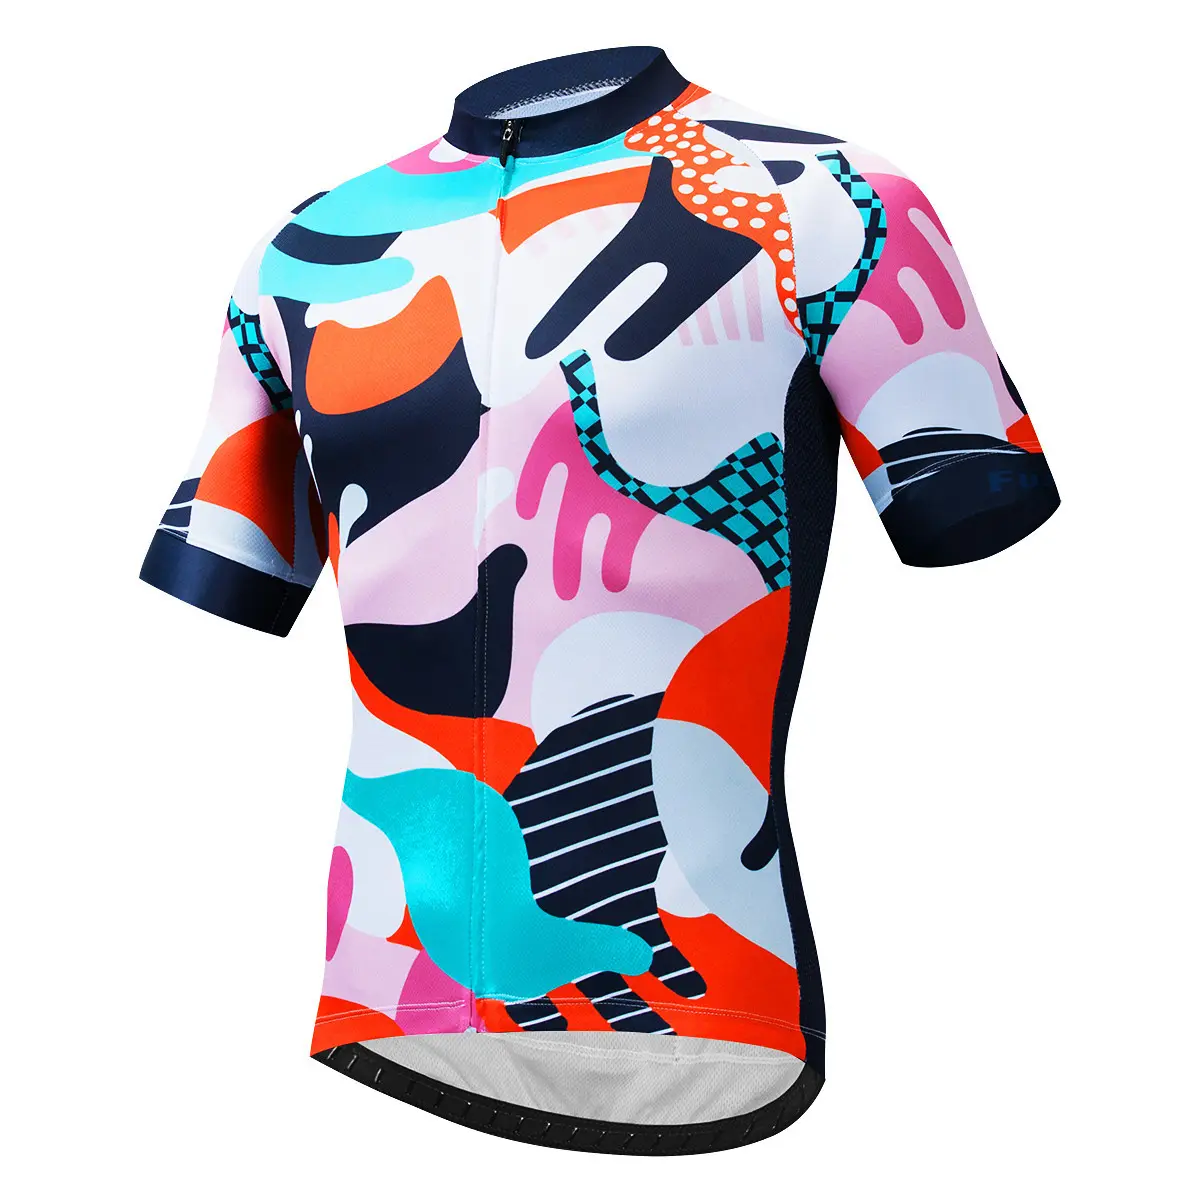 Oem Manufacturer Price Cycling Jersey Men Bicycle Clothes Pro Cycling Tops